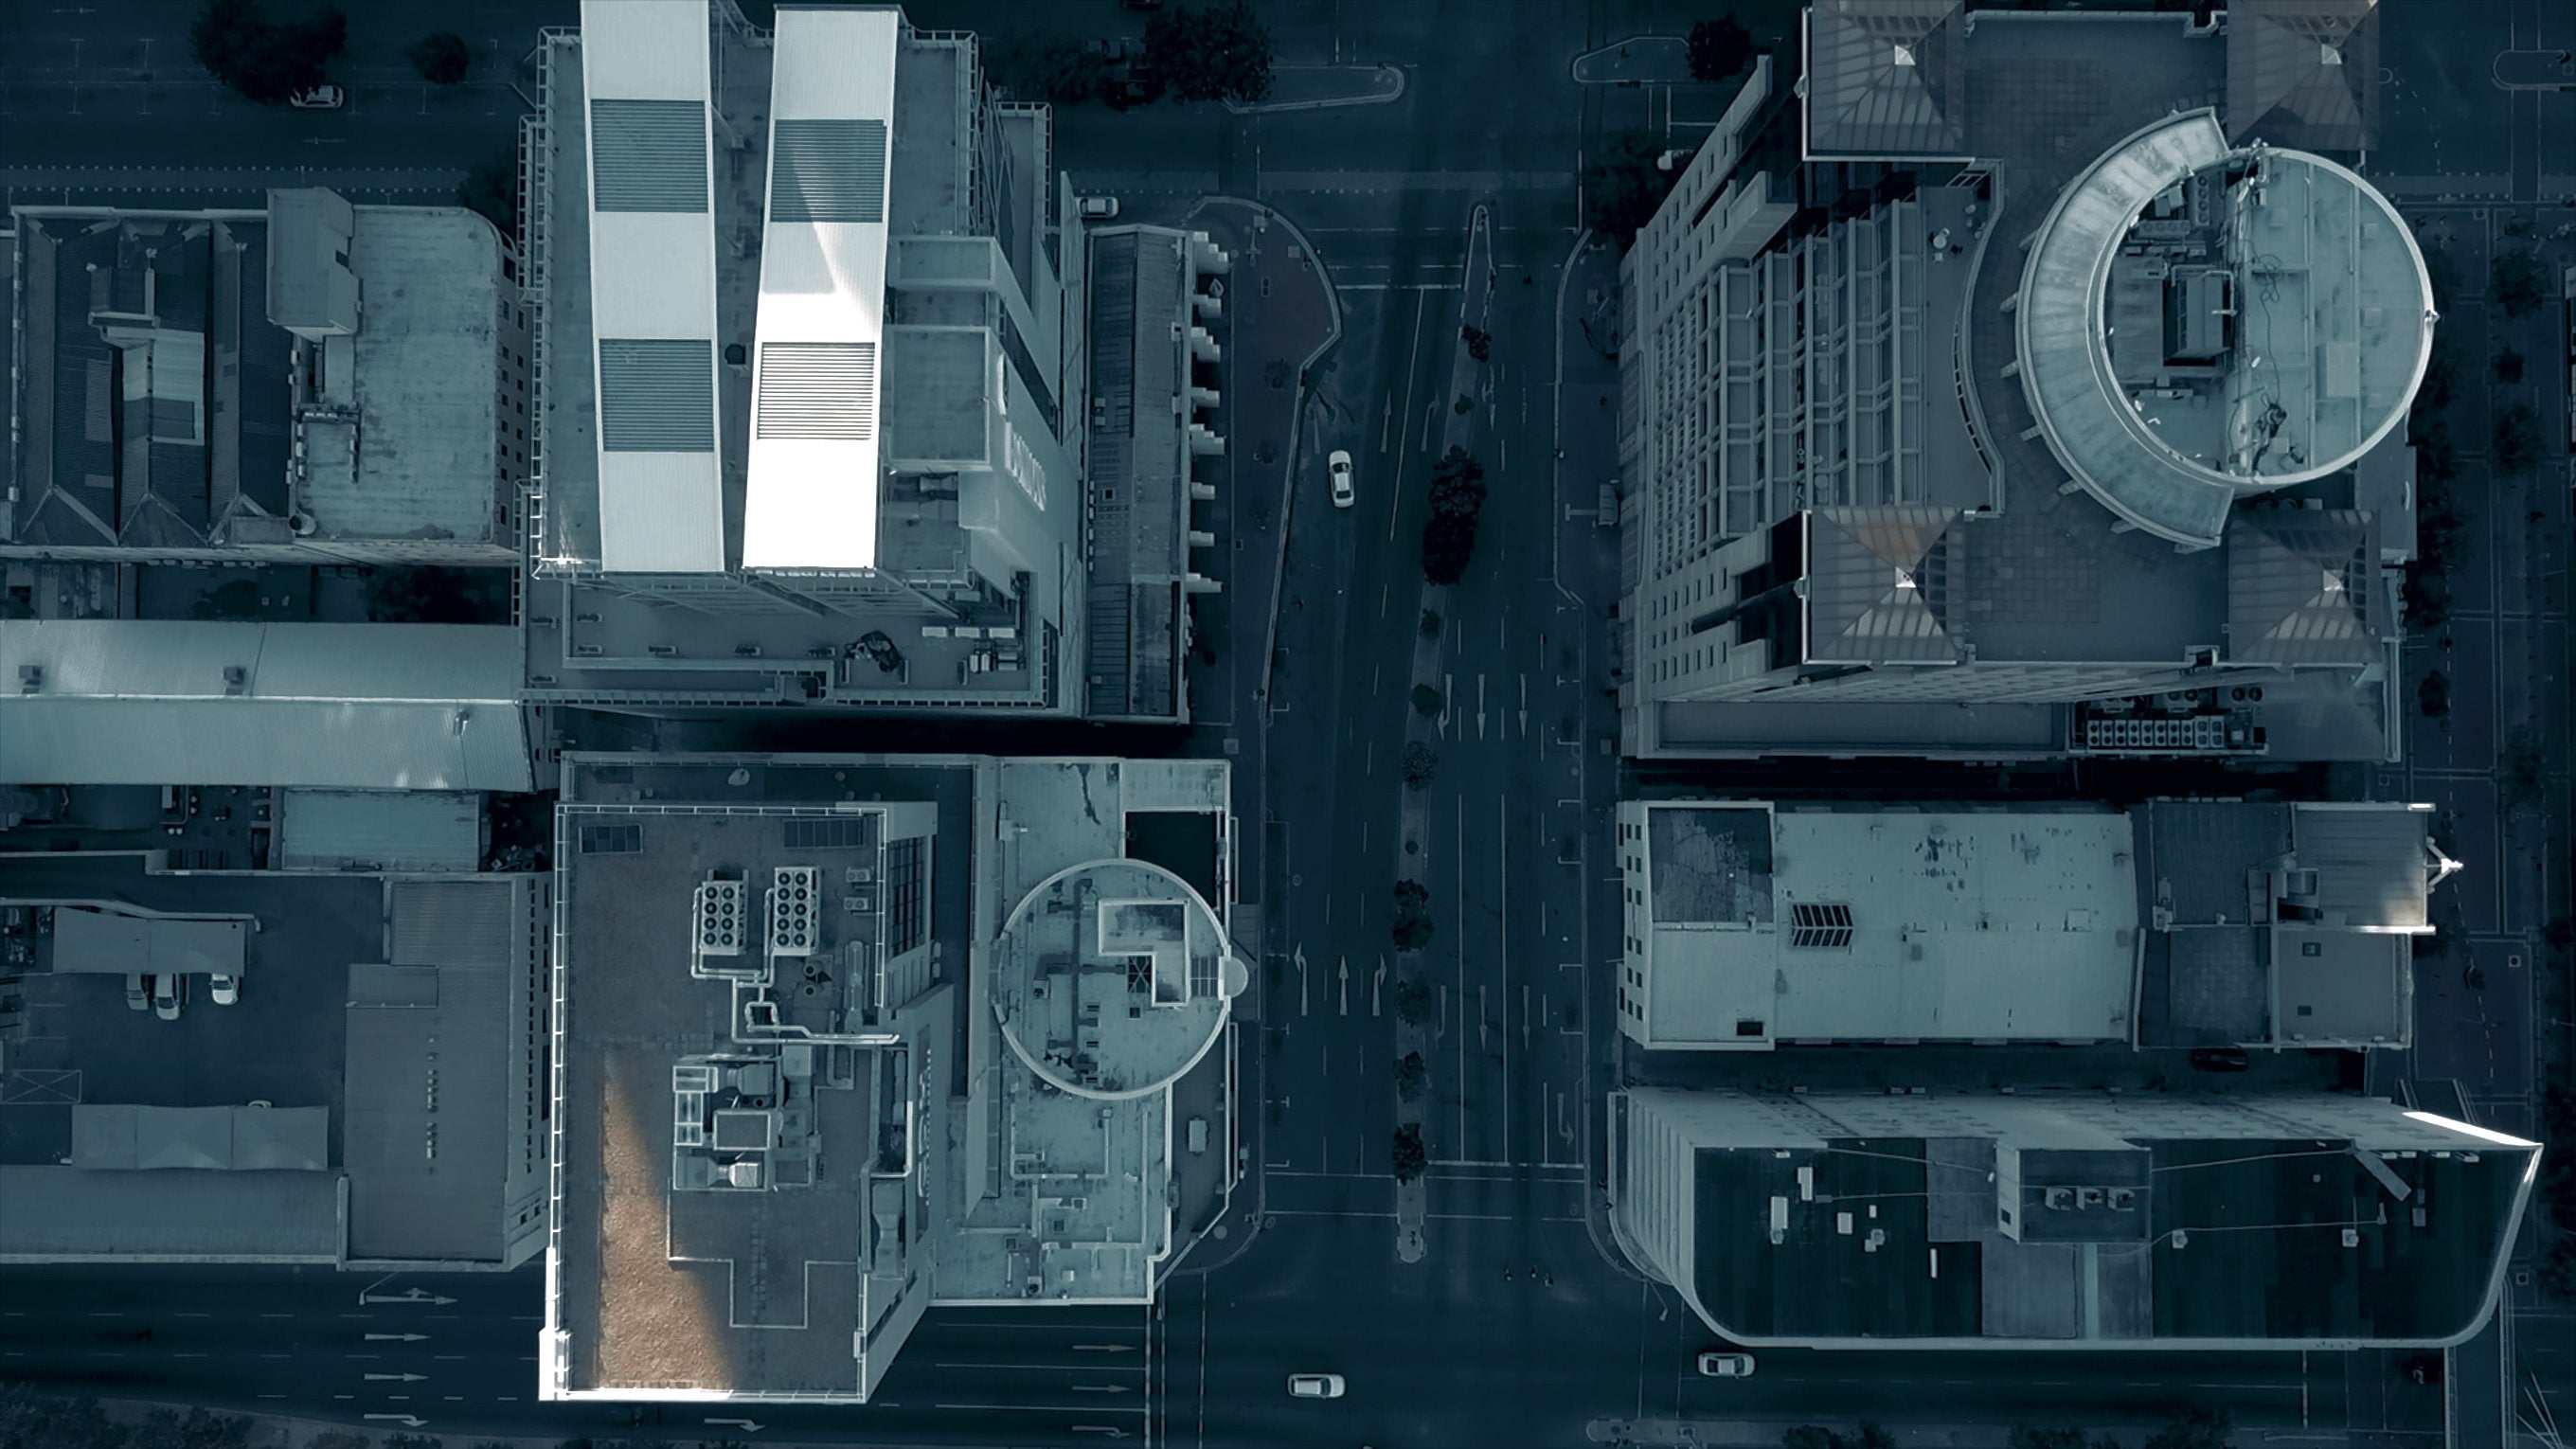 Match Both Camera & Drone Footage With Our Premium Grade Cinematic Color Preset LUTs